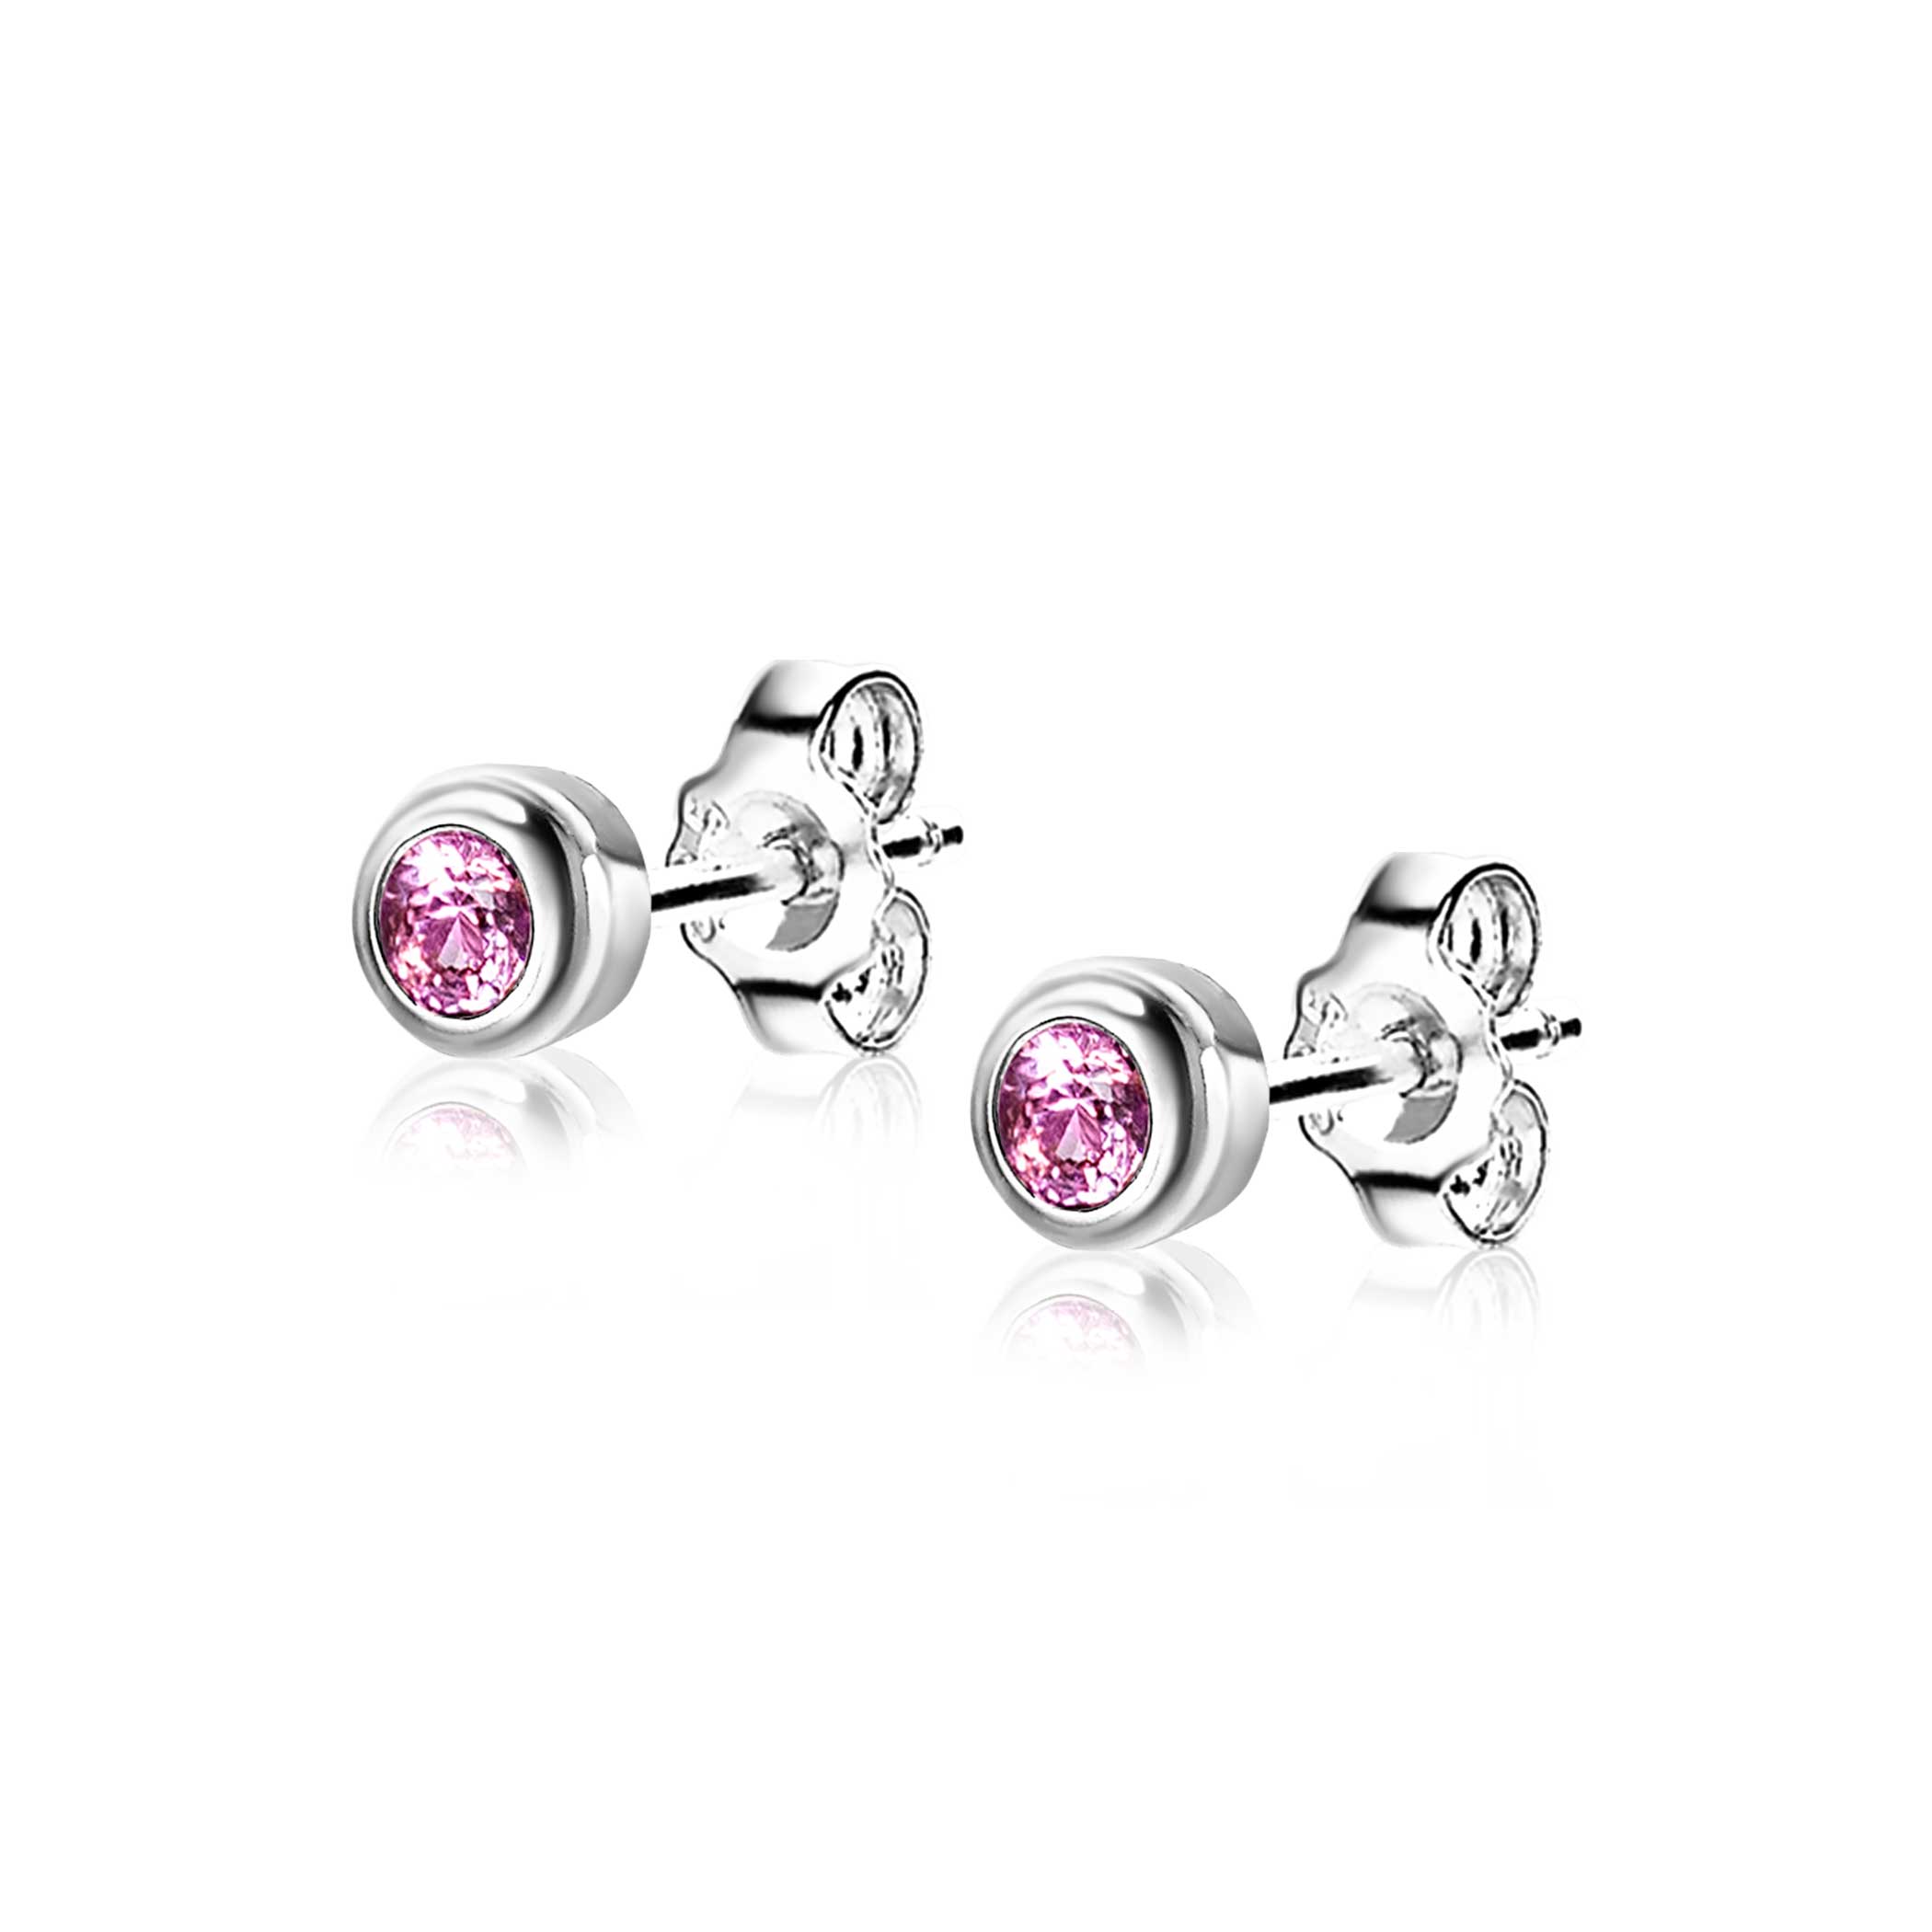 OCTOBER Stud Earrings 4mm Sterling Silver with Birthstone Pink Rose Quartz Zirconia